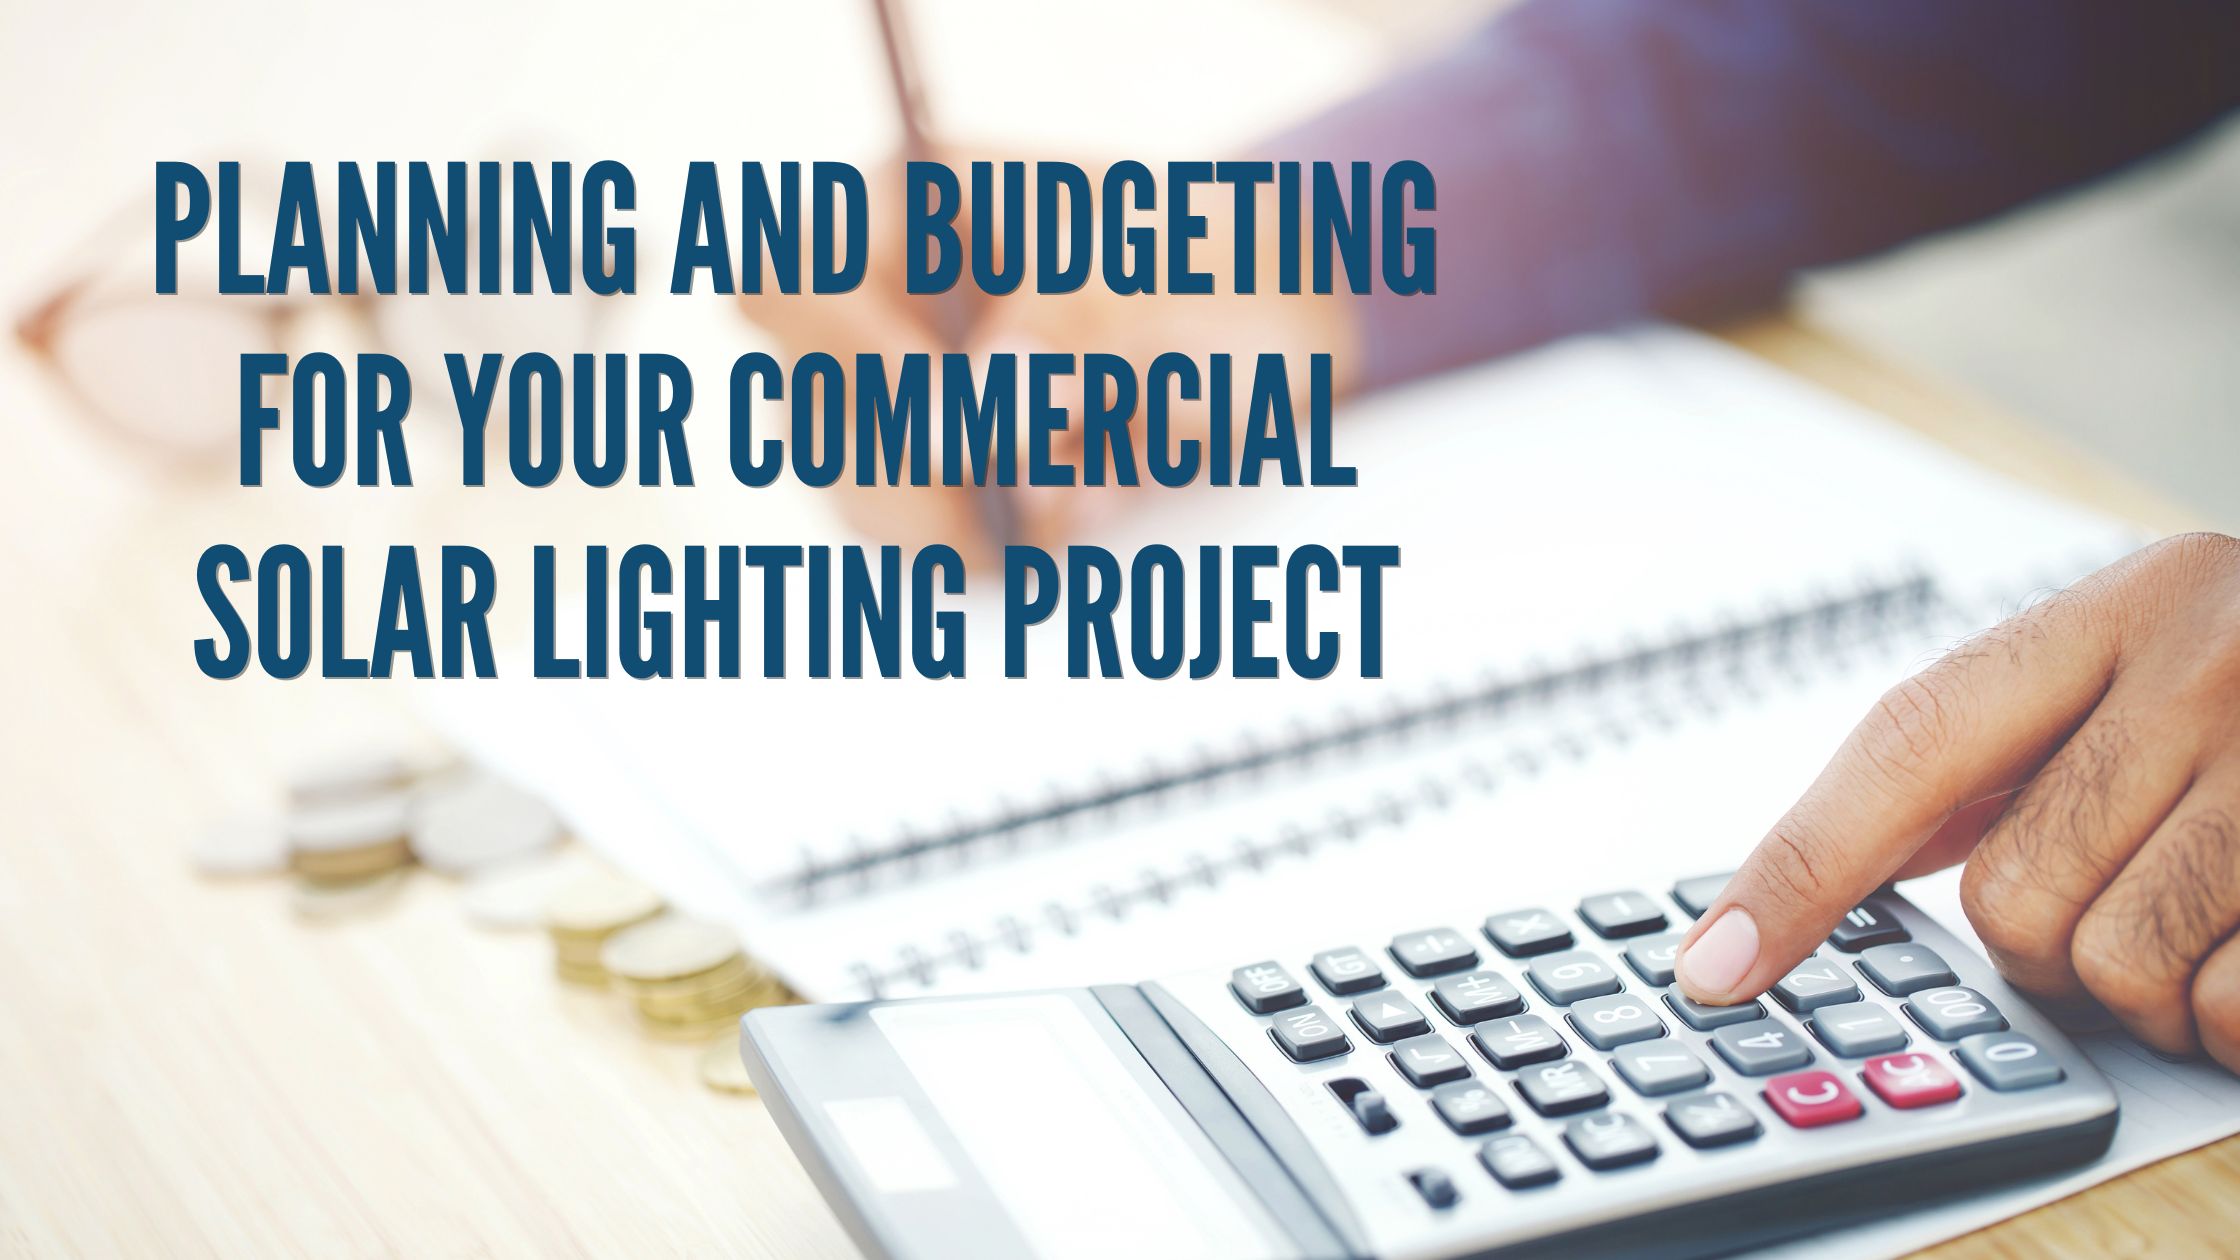 Planning and Budgeting For Your Commercial Solar Lighting Project